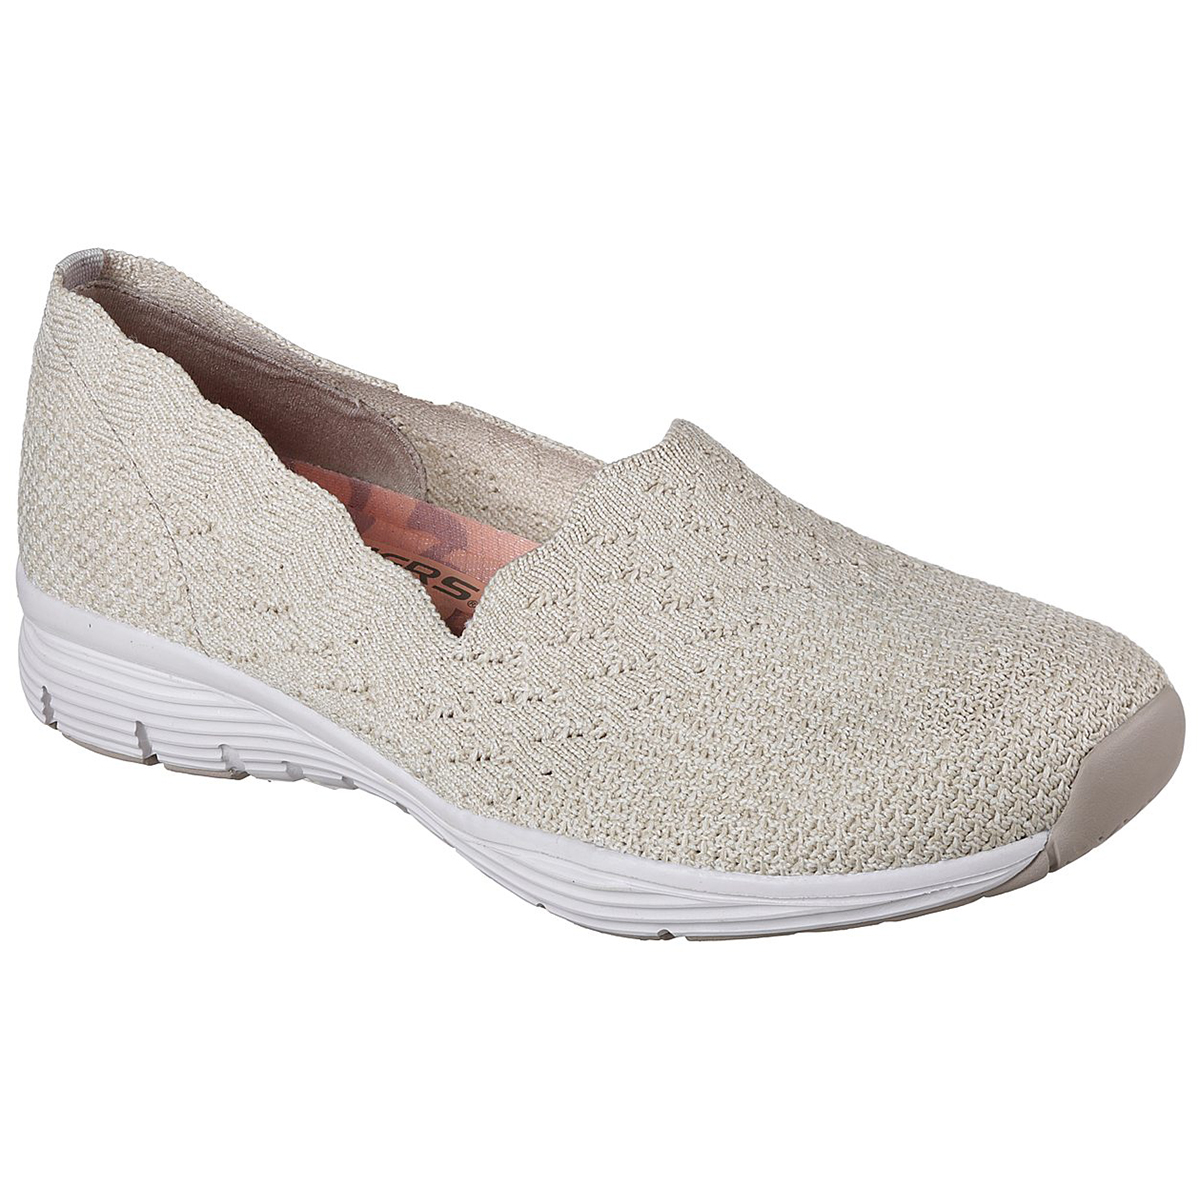 Skechers Women's Seager - Stat Casual Slip-On Shoes - White, 6